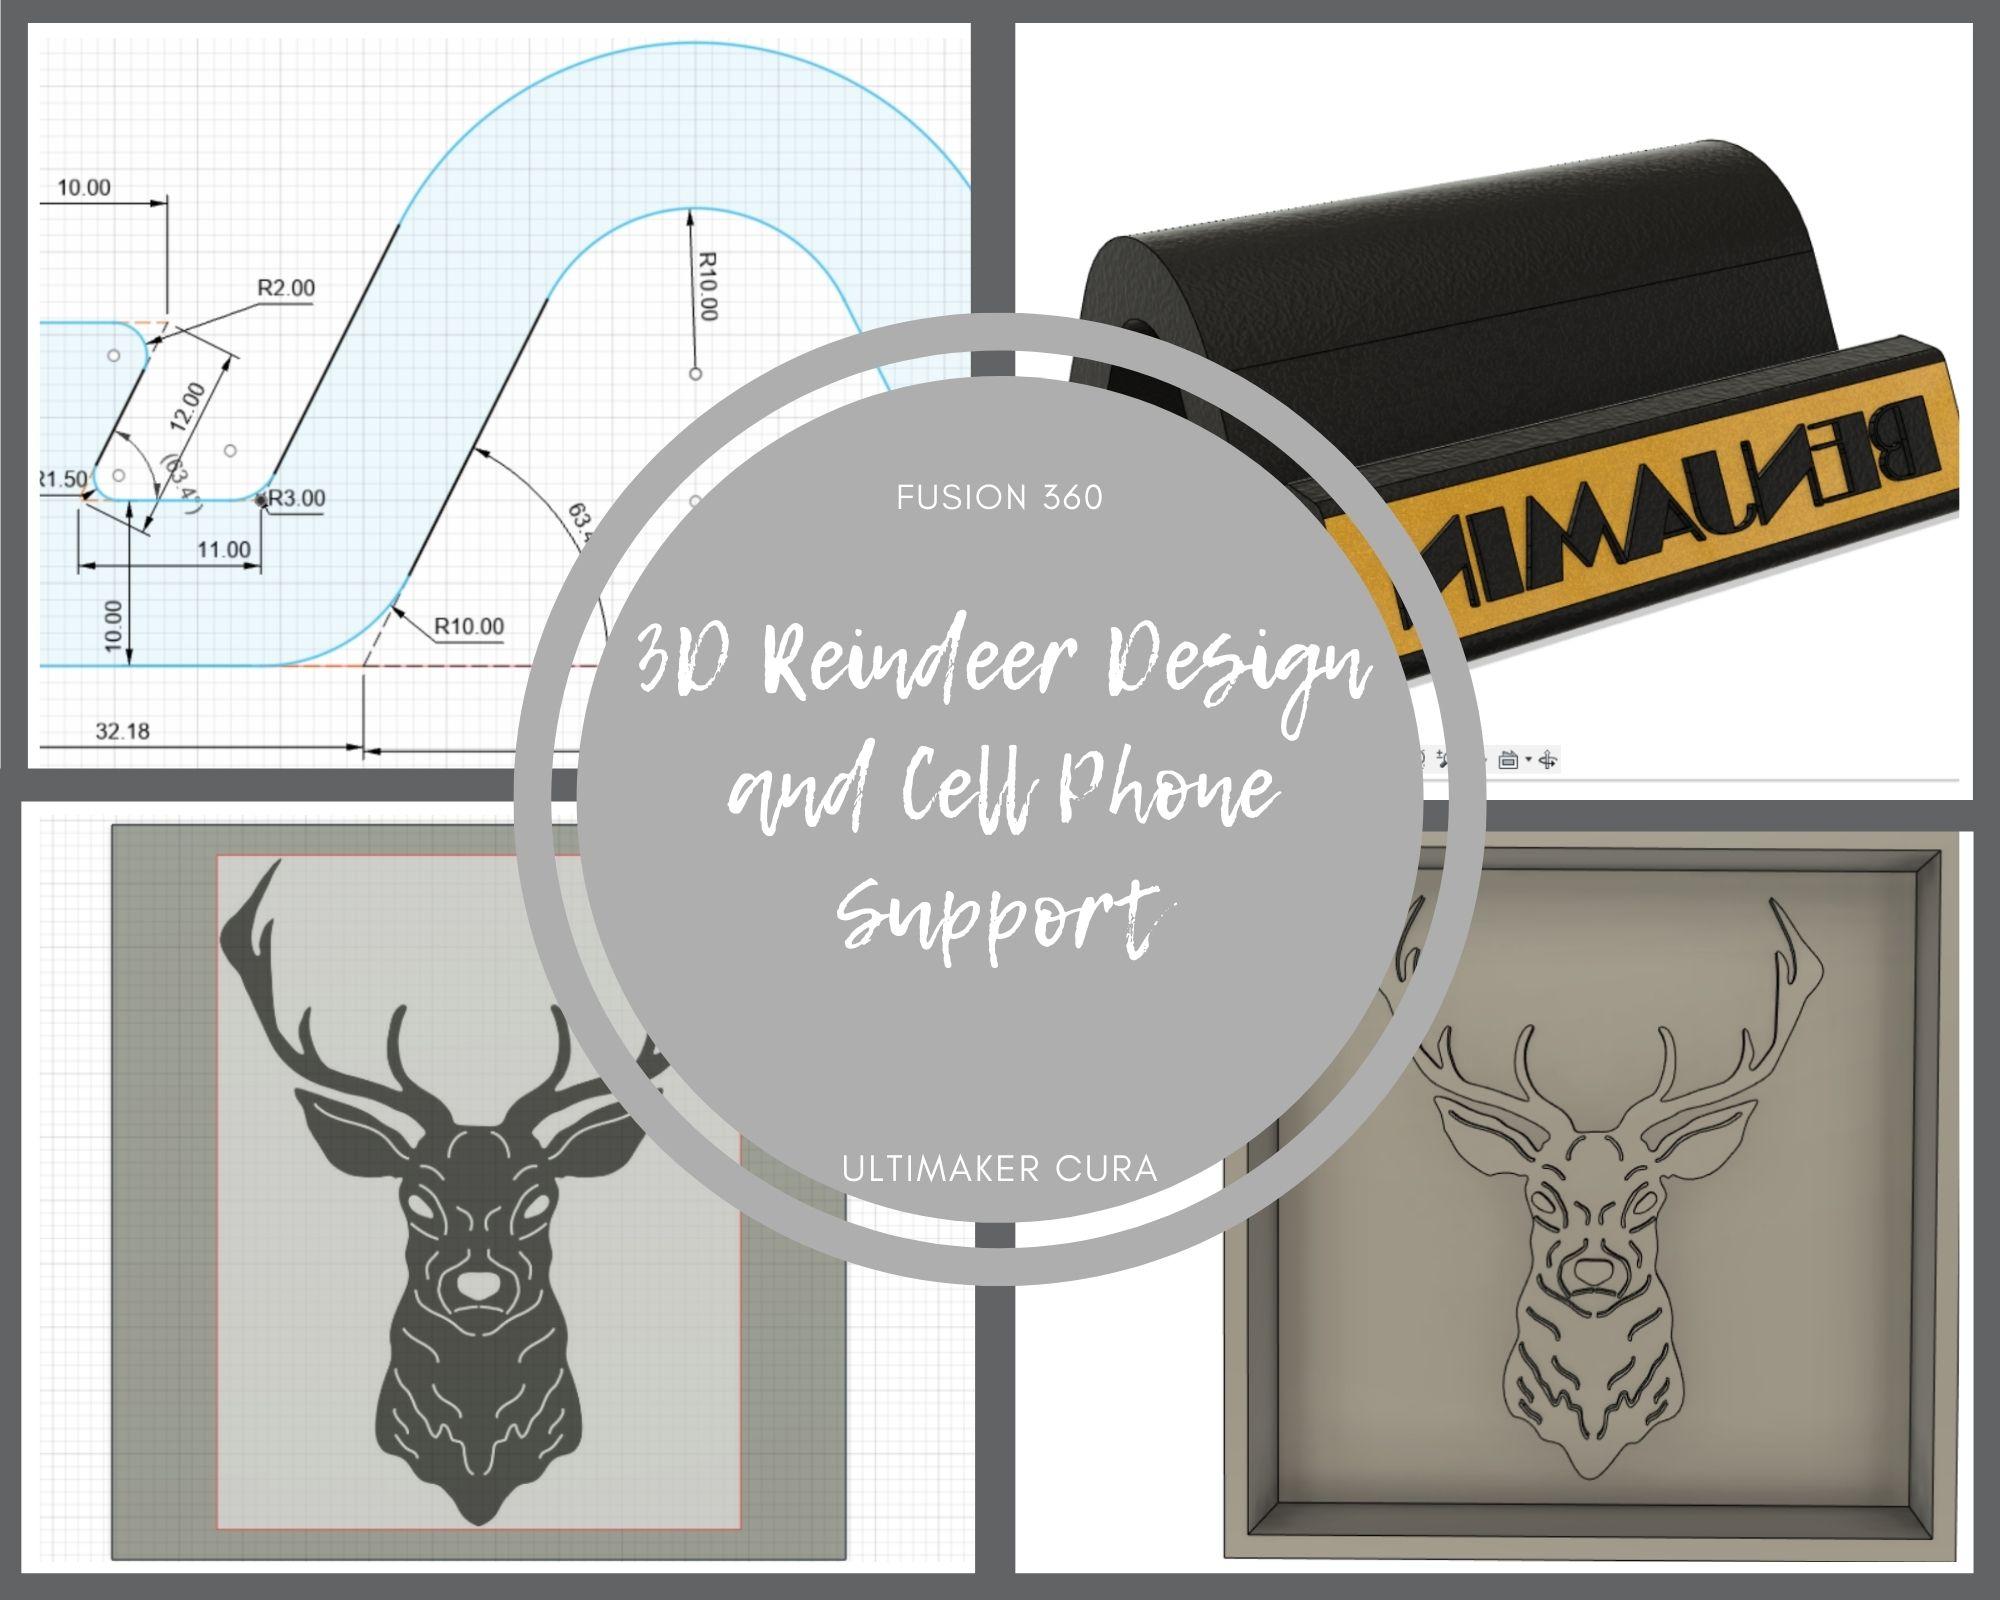 3D Reindeer Design and Cell Phone Support.jpg